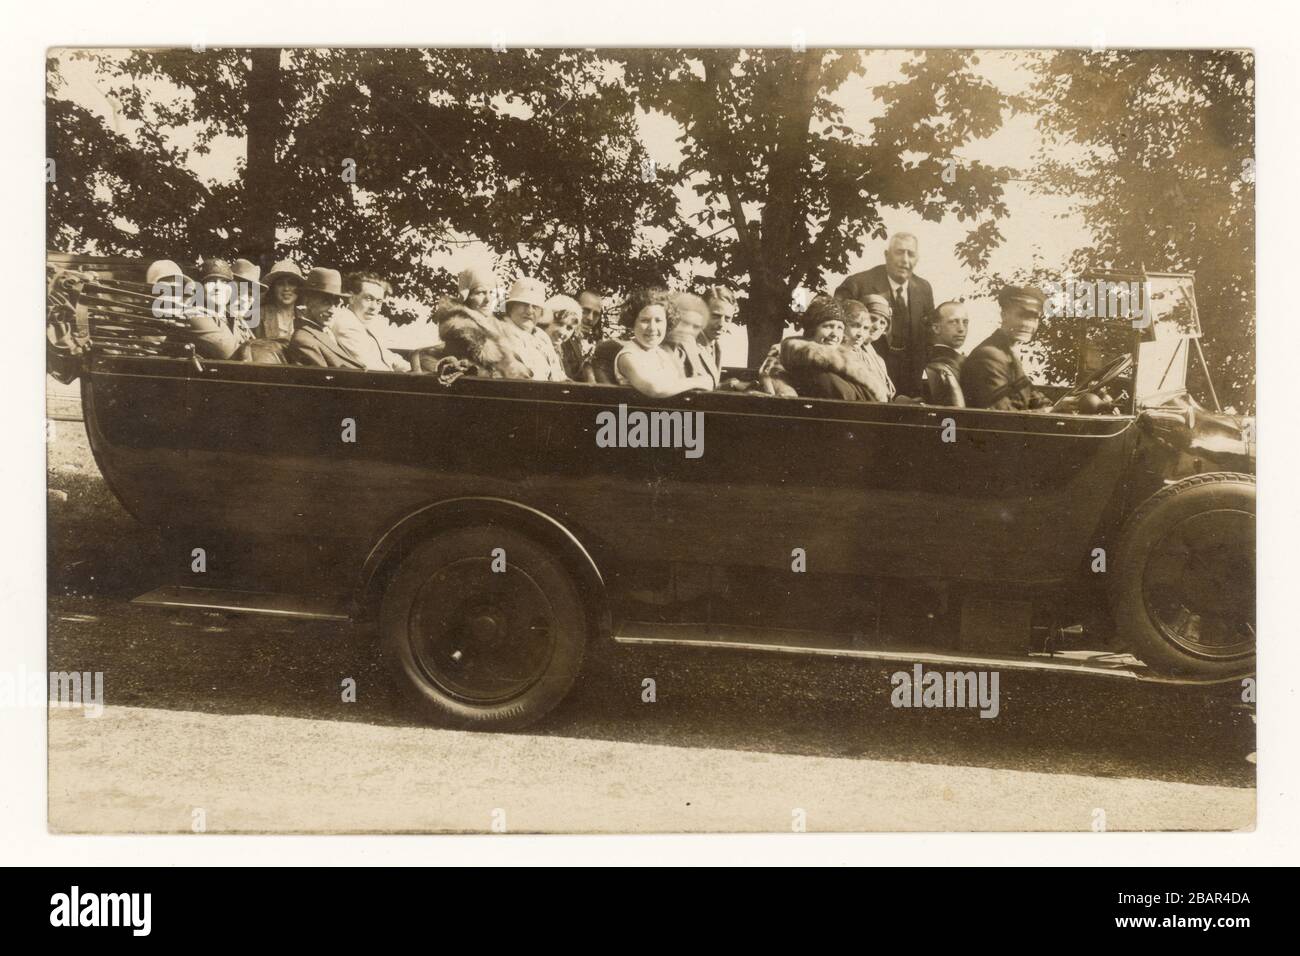 1920s postcard of typical charabanc outing, women wear cloche hats fashionable at the time, Stock Photo